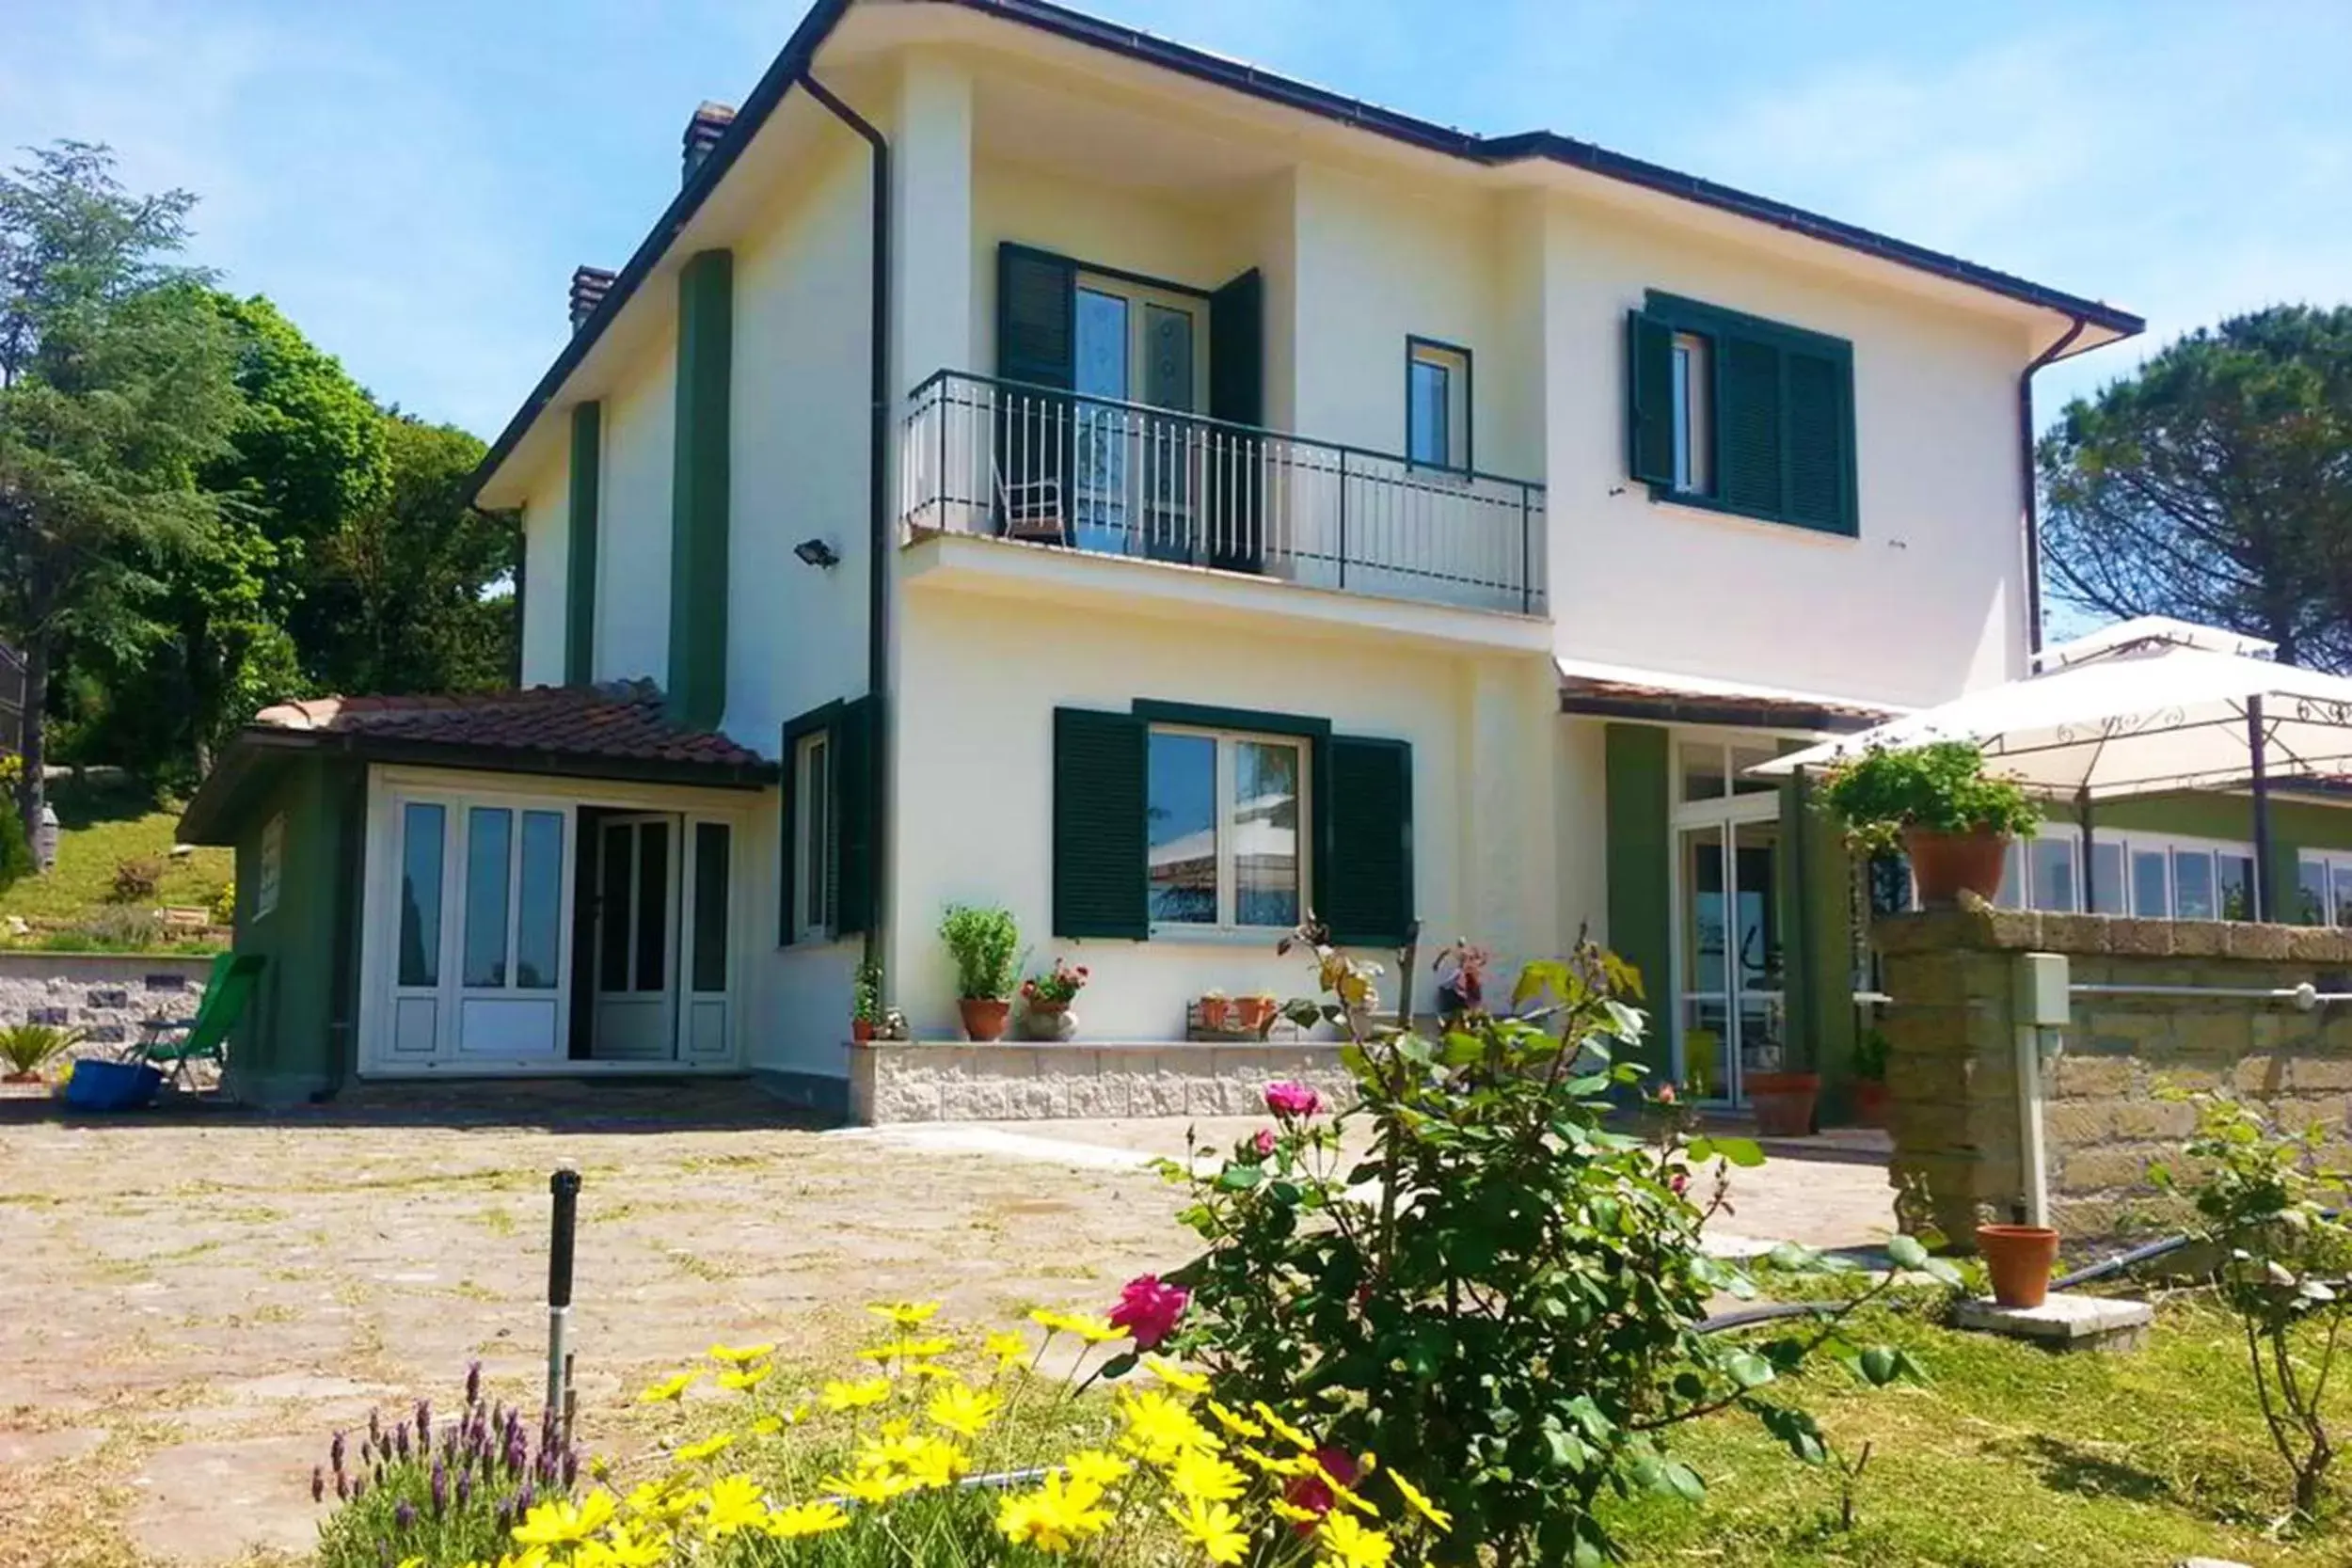 Nearby landmark, Property Building in Bed and Breakfast Romantica Evasione